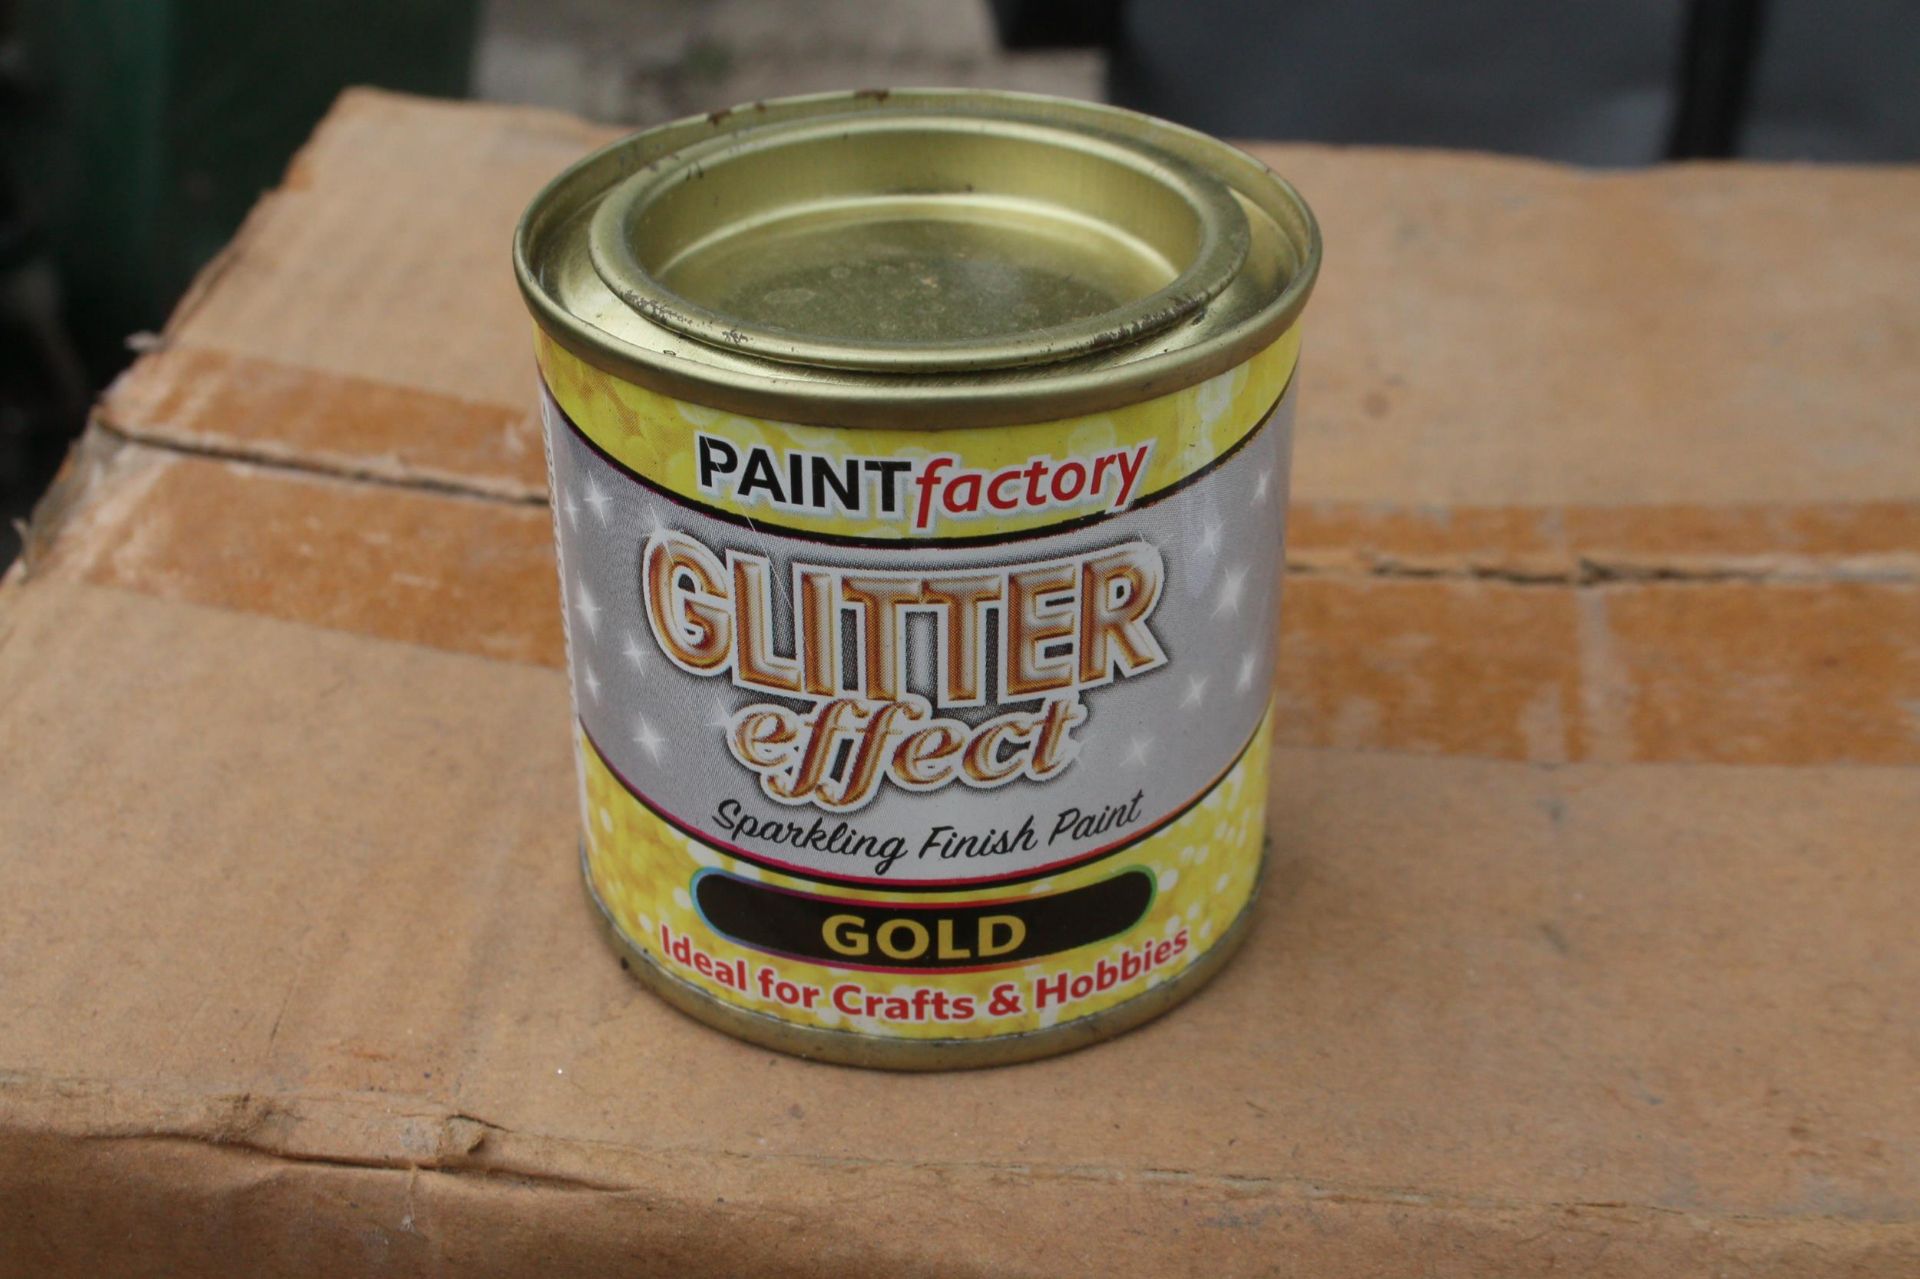 48 NEW TINS OF GOLD GLITTER PAINT NO VAT - Image 2 of 2